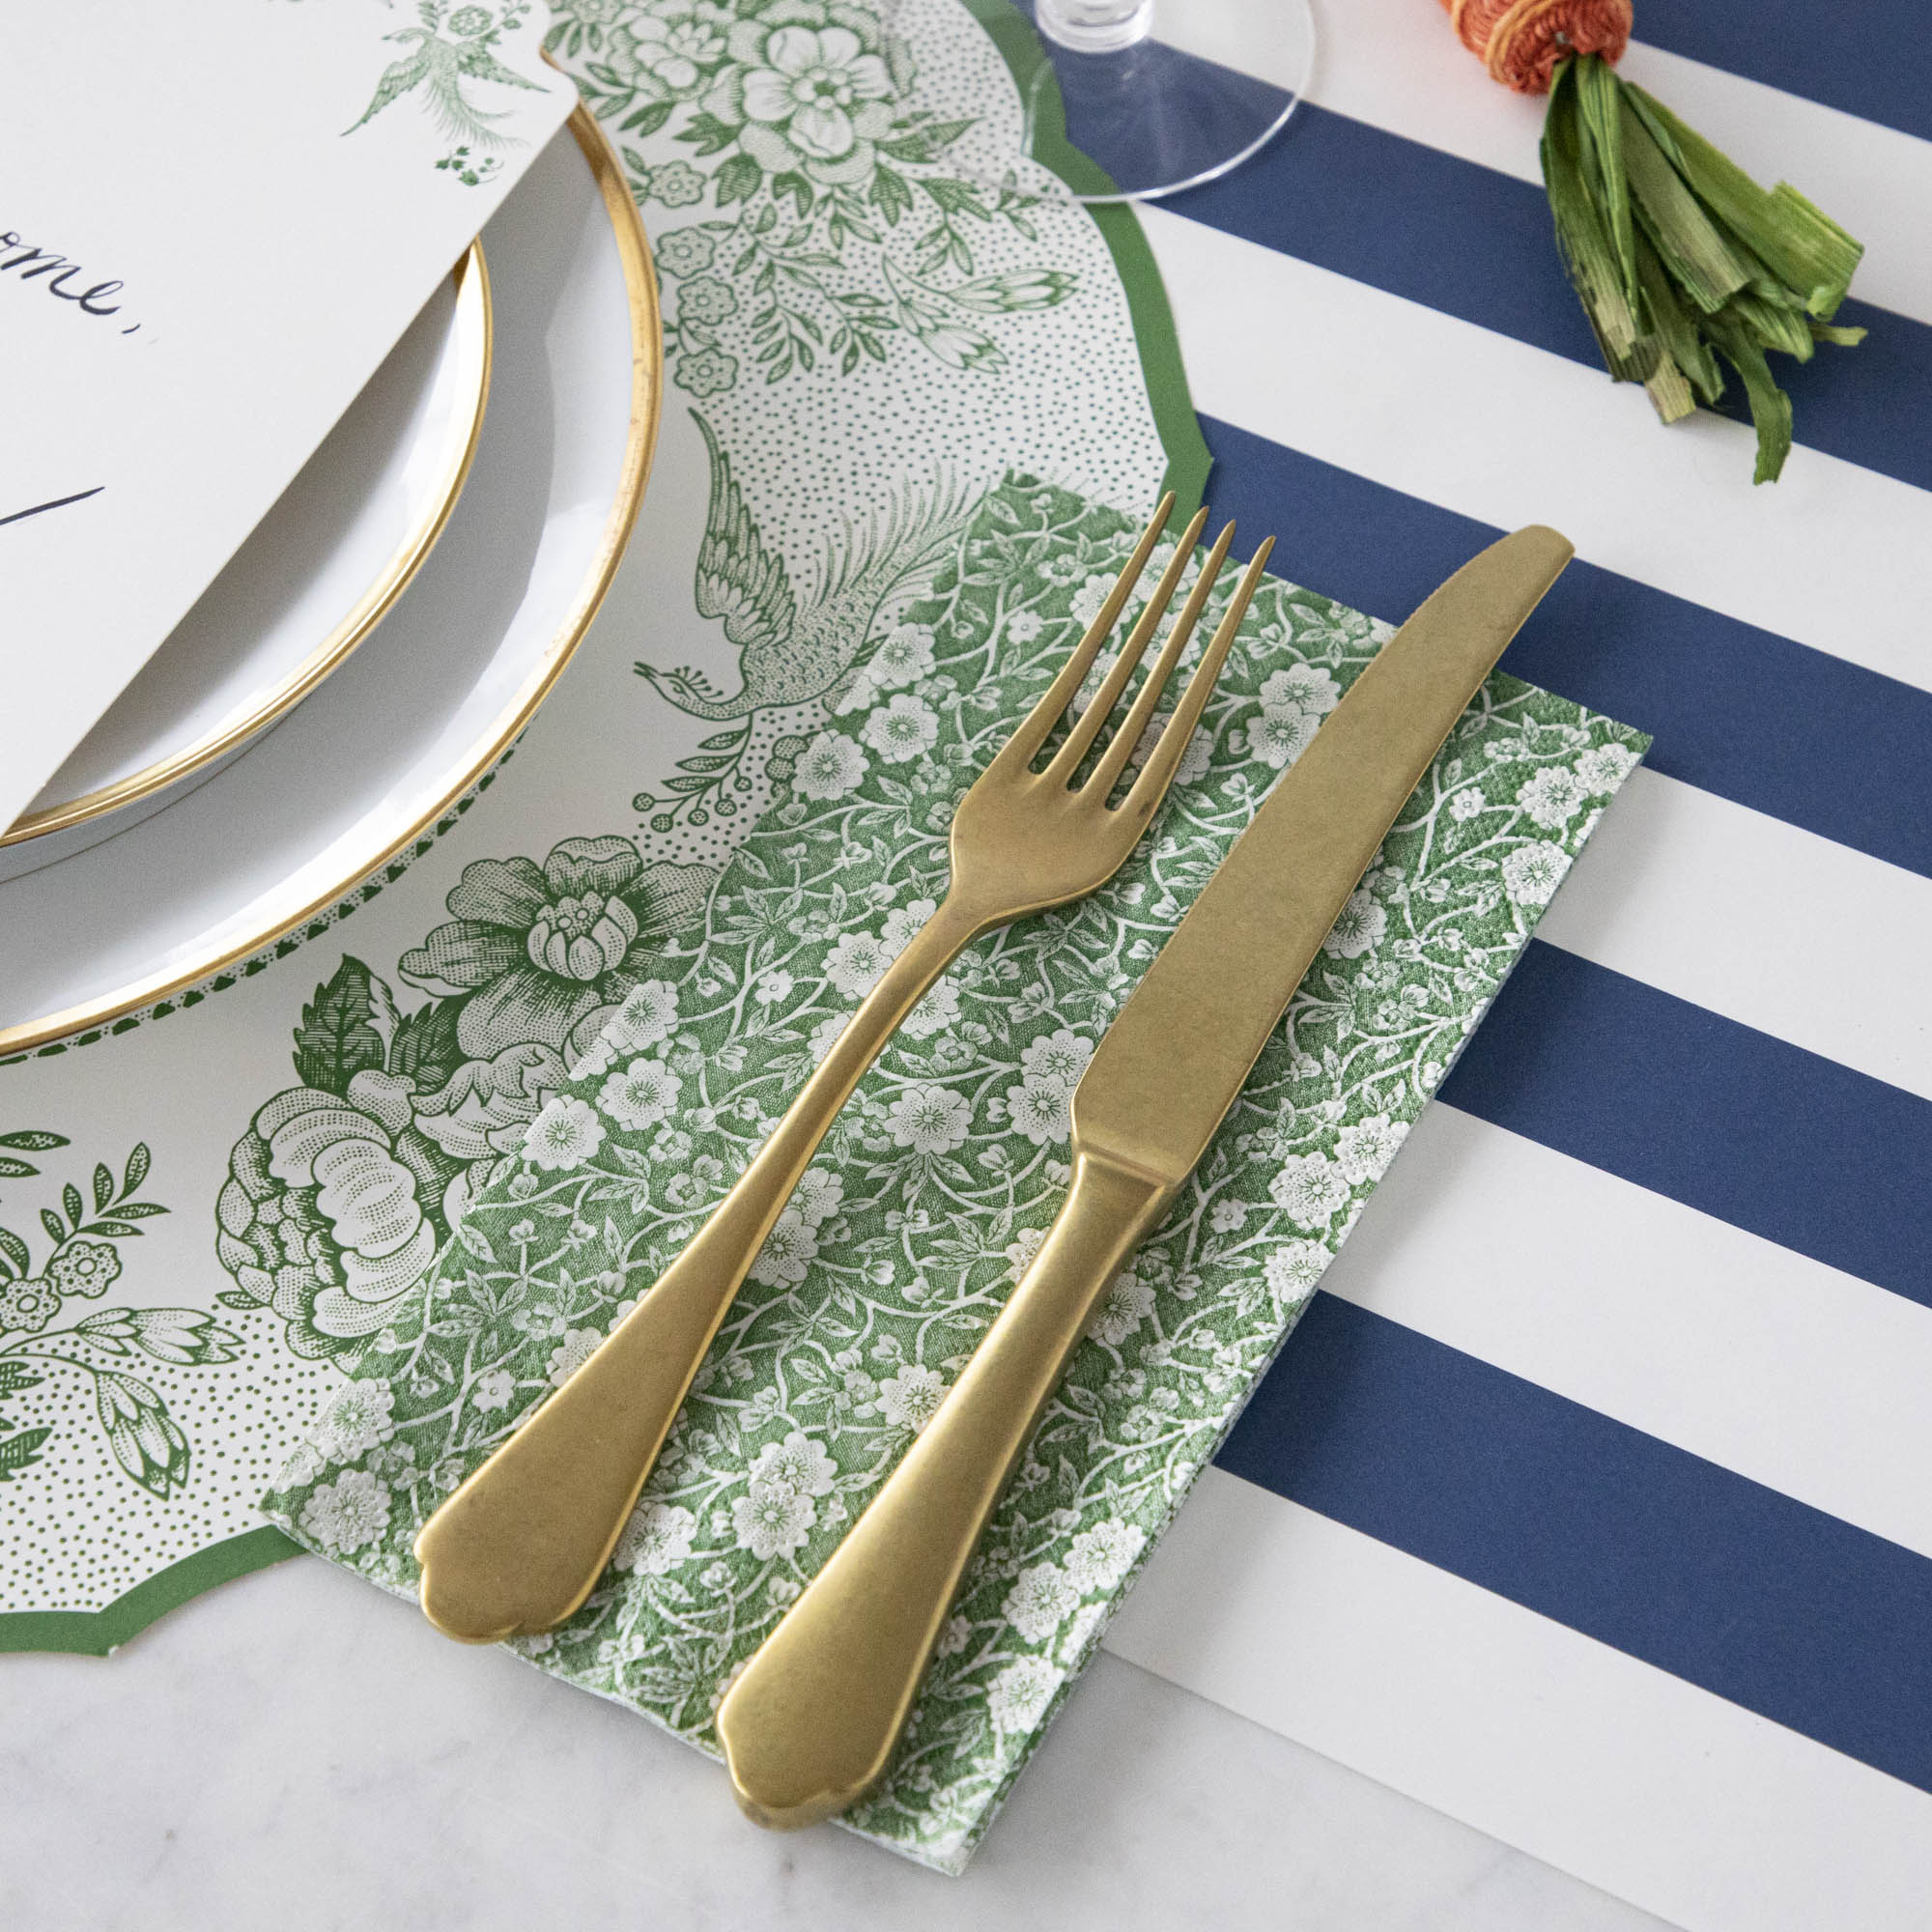 A table setting with a gold fork and knife on a Green Calico Napkins, Hester &amp; Cook striped tablecloth.